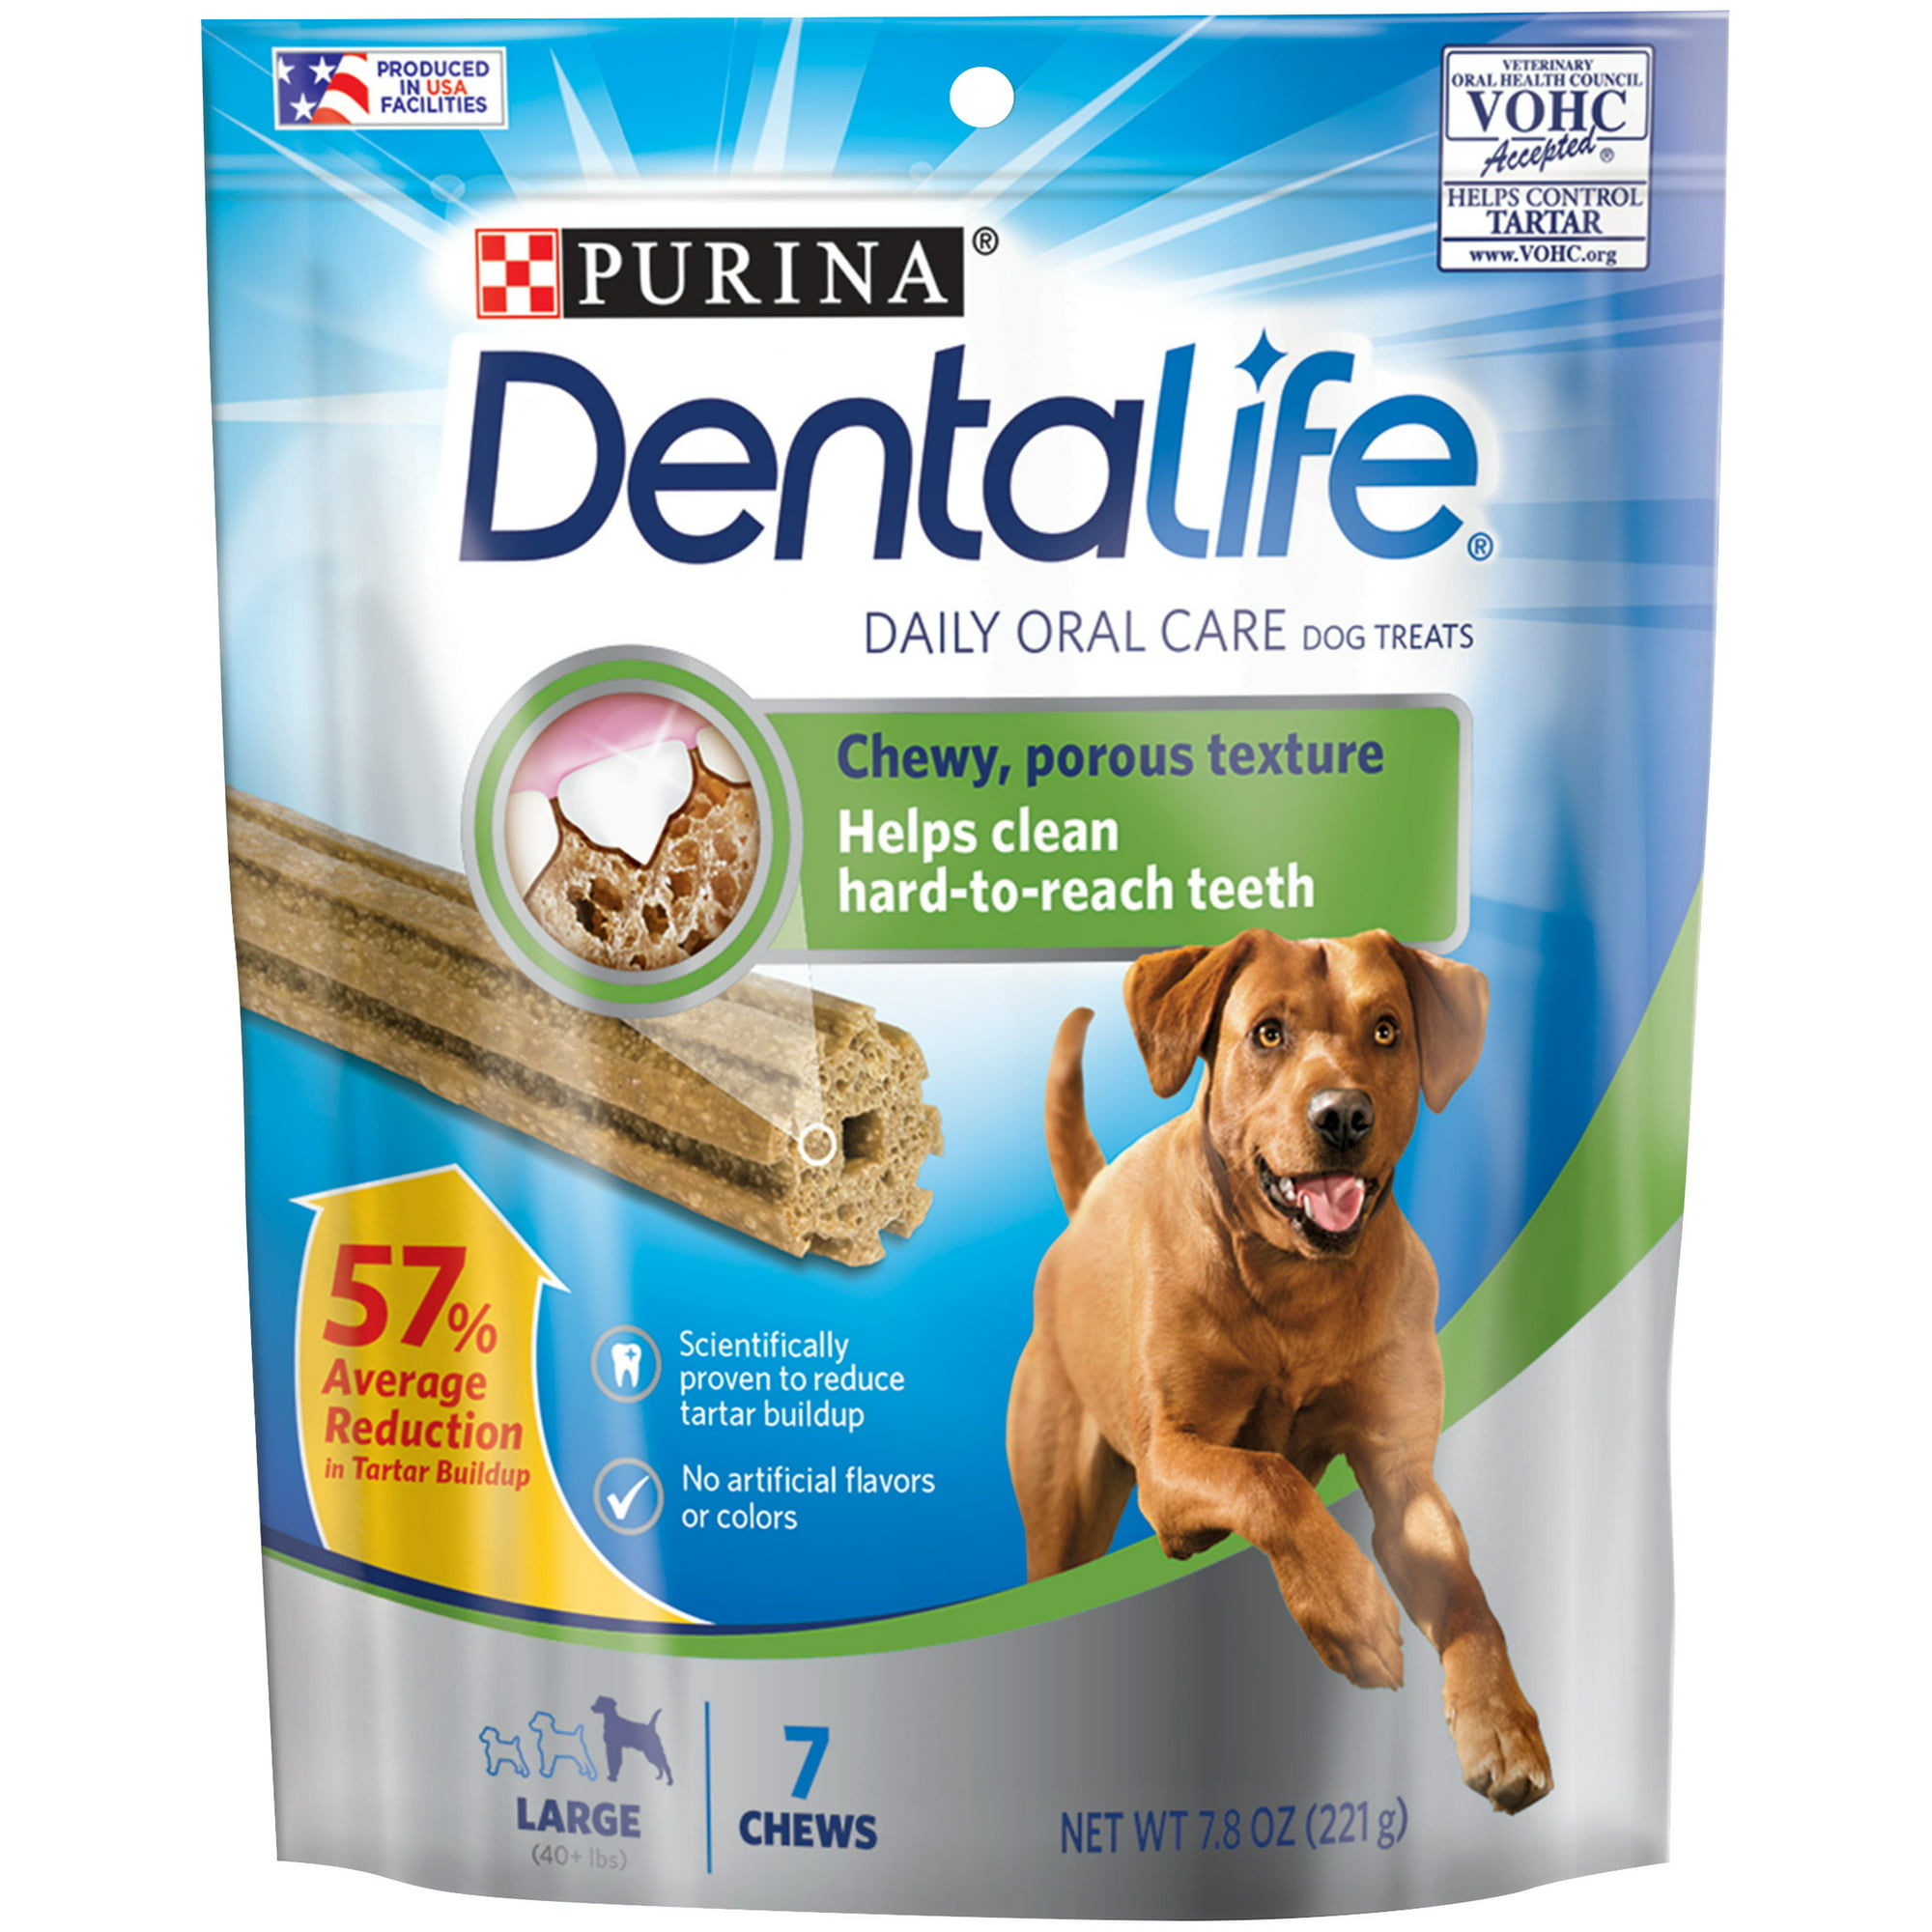 Purina DentaLife Large Dog Dental Chews, Daily, 7 ct. Pouch